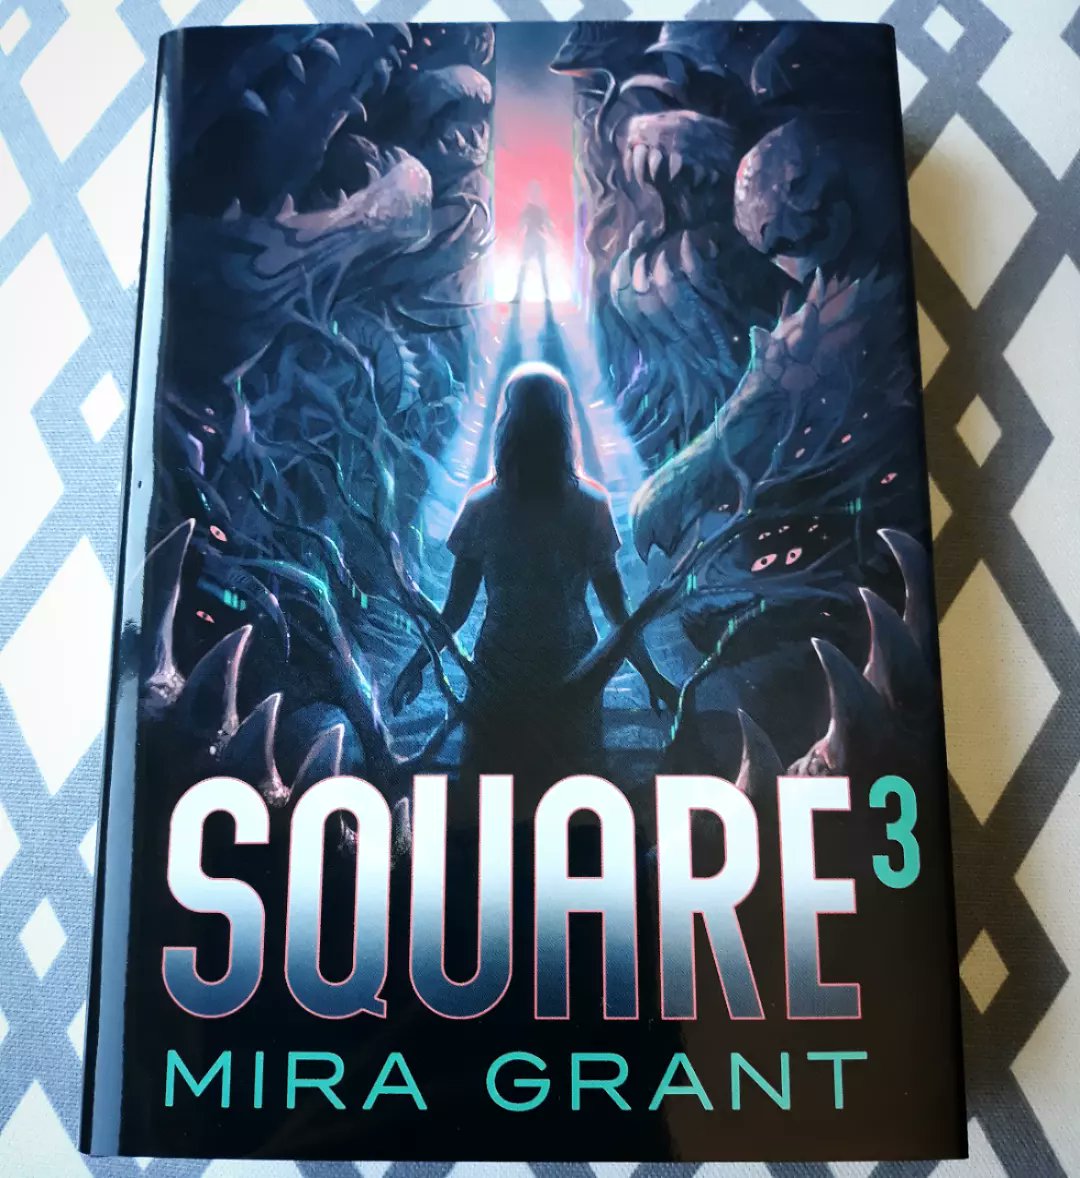 27th read this year & 3rd by Seanan McGuire (writing as Mira Grant)! Love this post-pandemic novella abt 2 sisters caught on different sides of dimensional rifts. Seanan is hands down my fav author. If you've never read 1 of her books before, please do! 😄📚💜 

#booksellerJaya